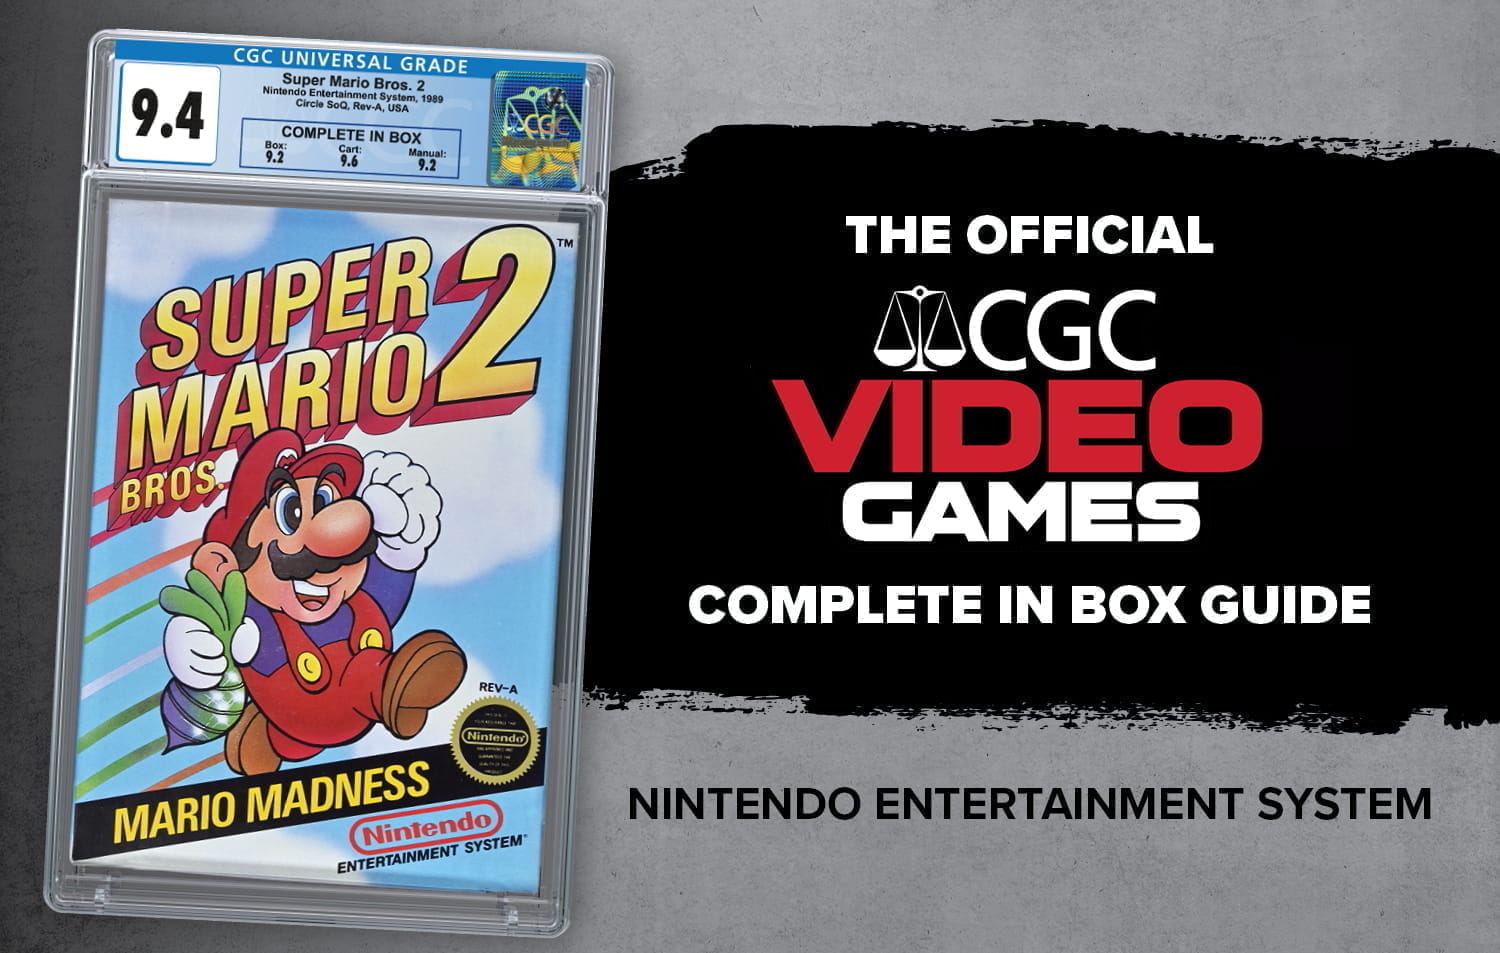 CGC Video Games Complete In Box Guide